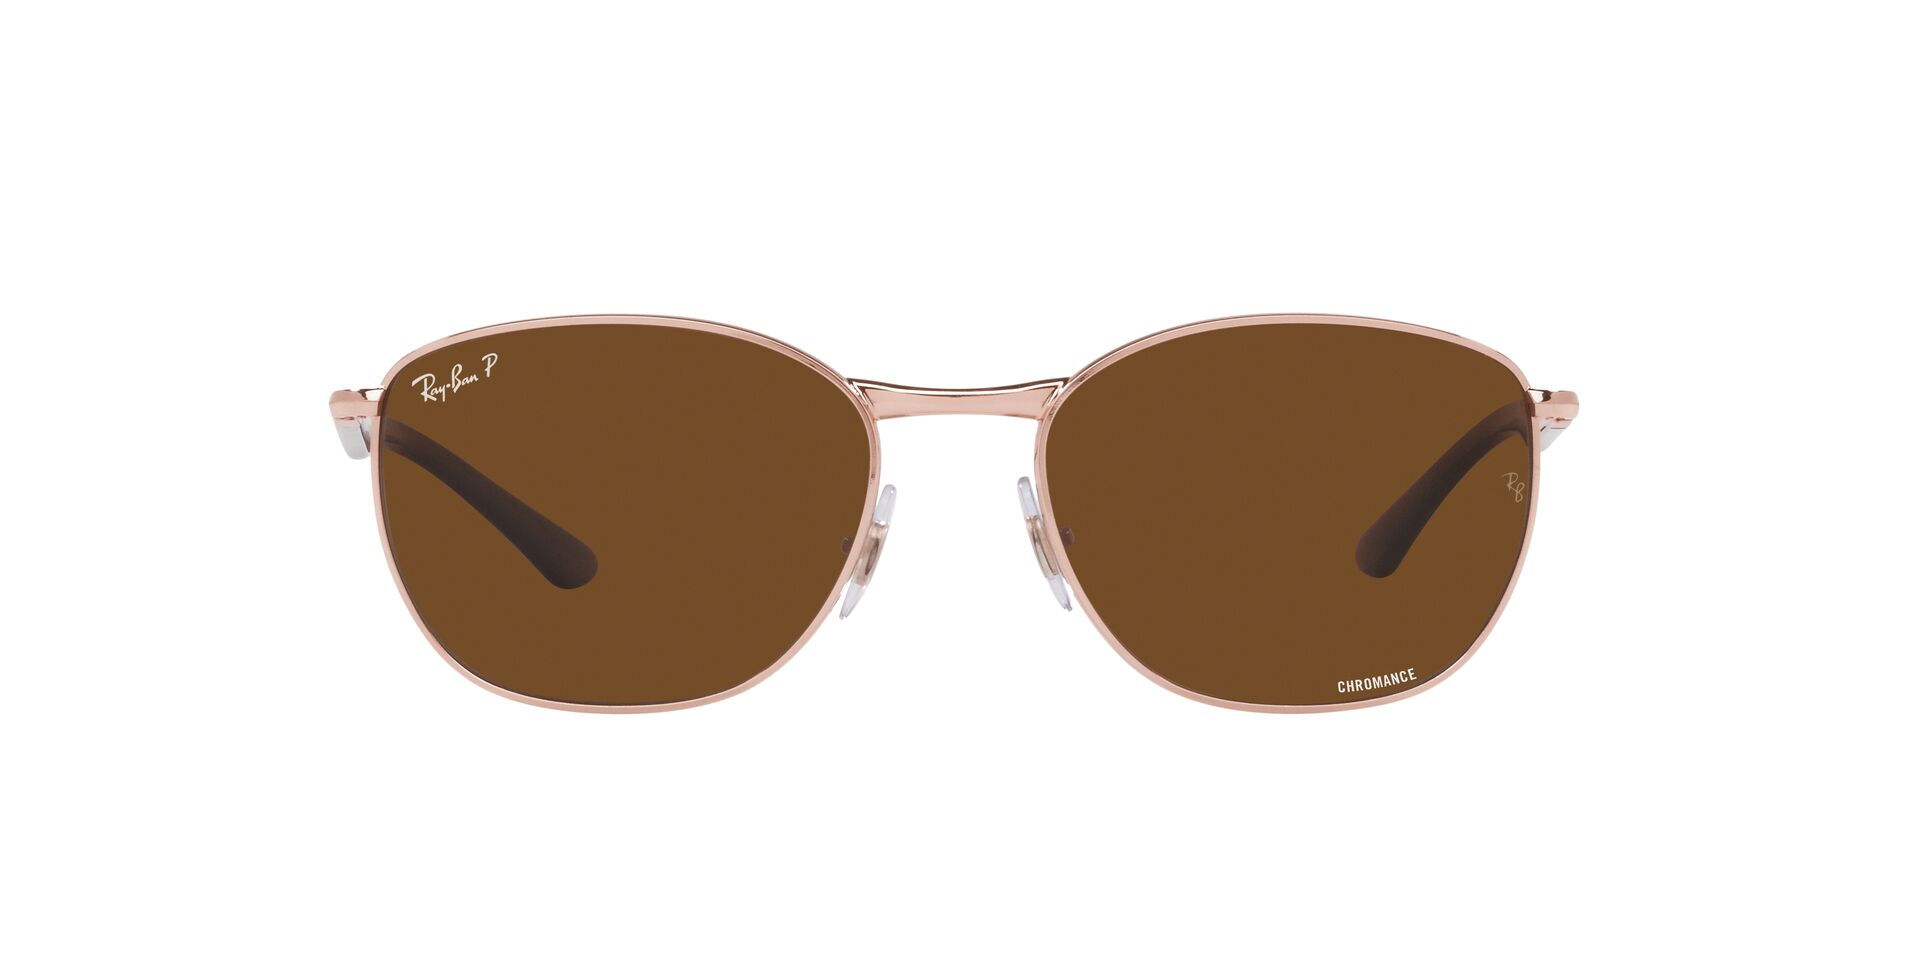 Buy Best Ray-Ban Core Sunglasses Online